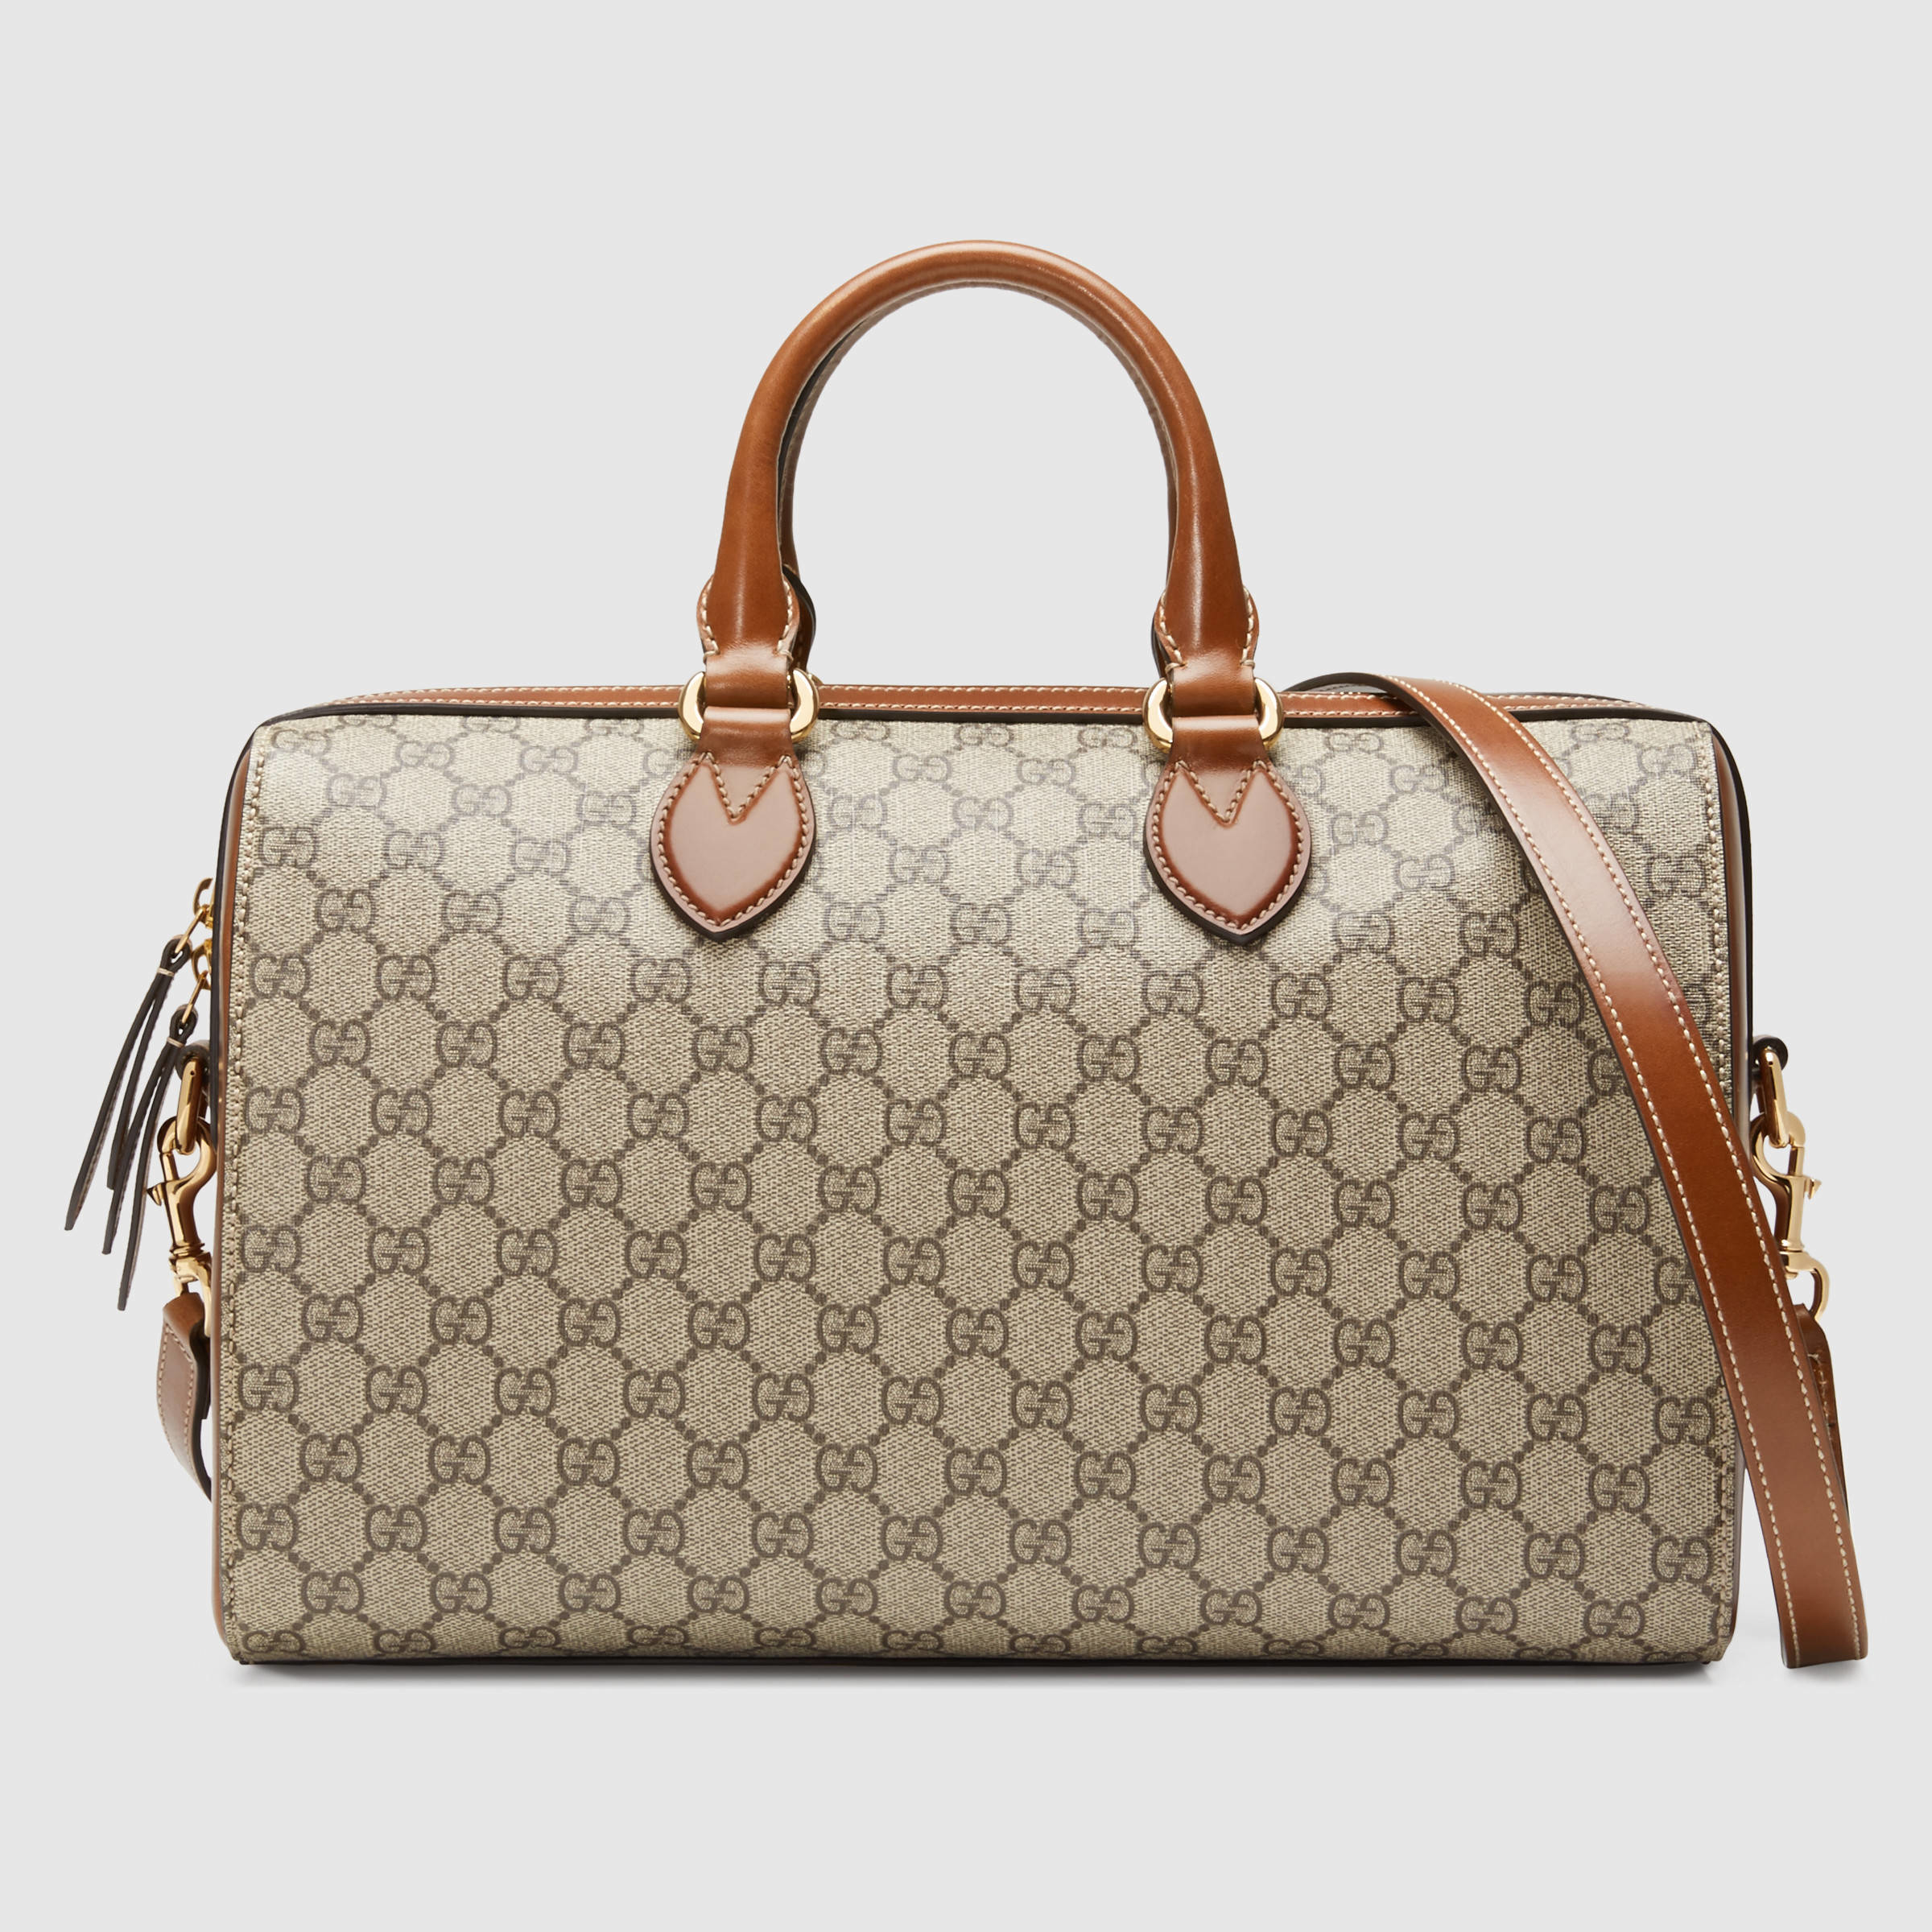 Gucci Gg Supreme Top Handle Bag in Brown | Lyst